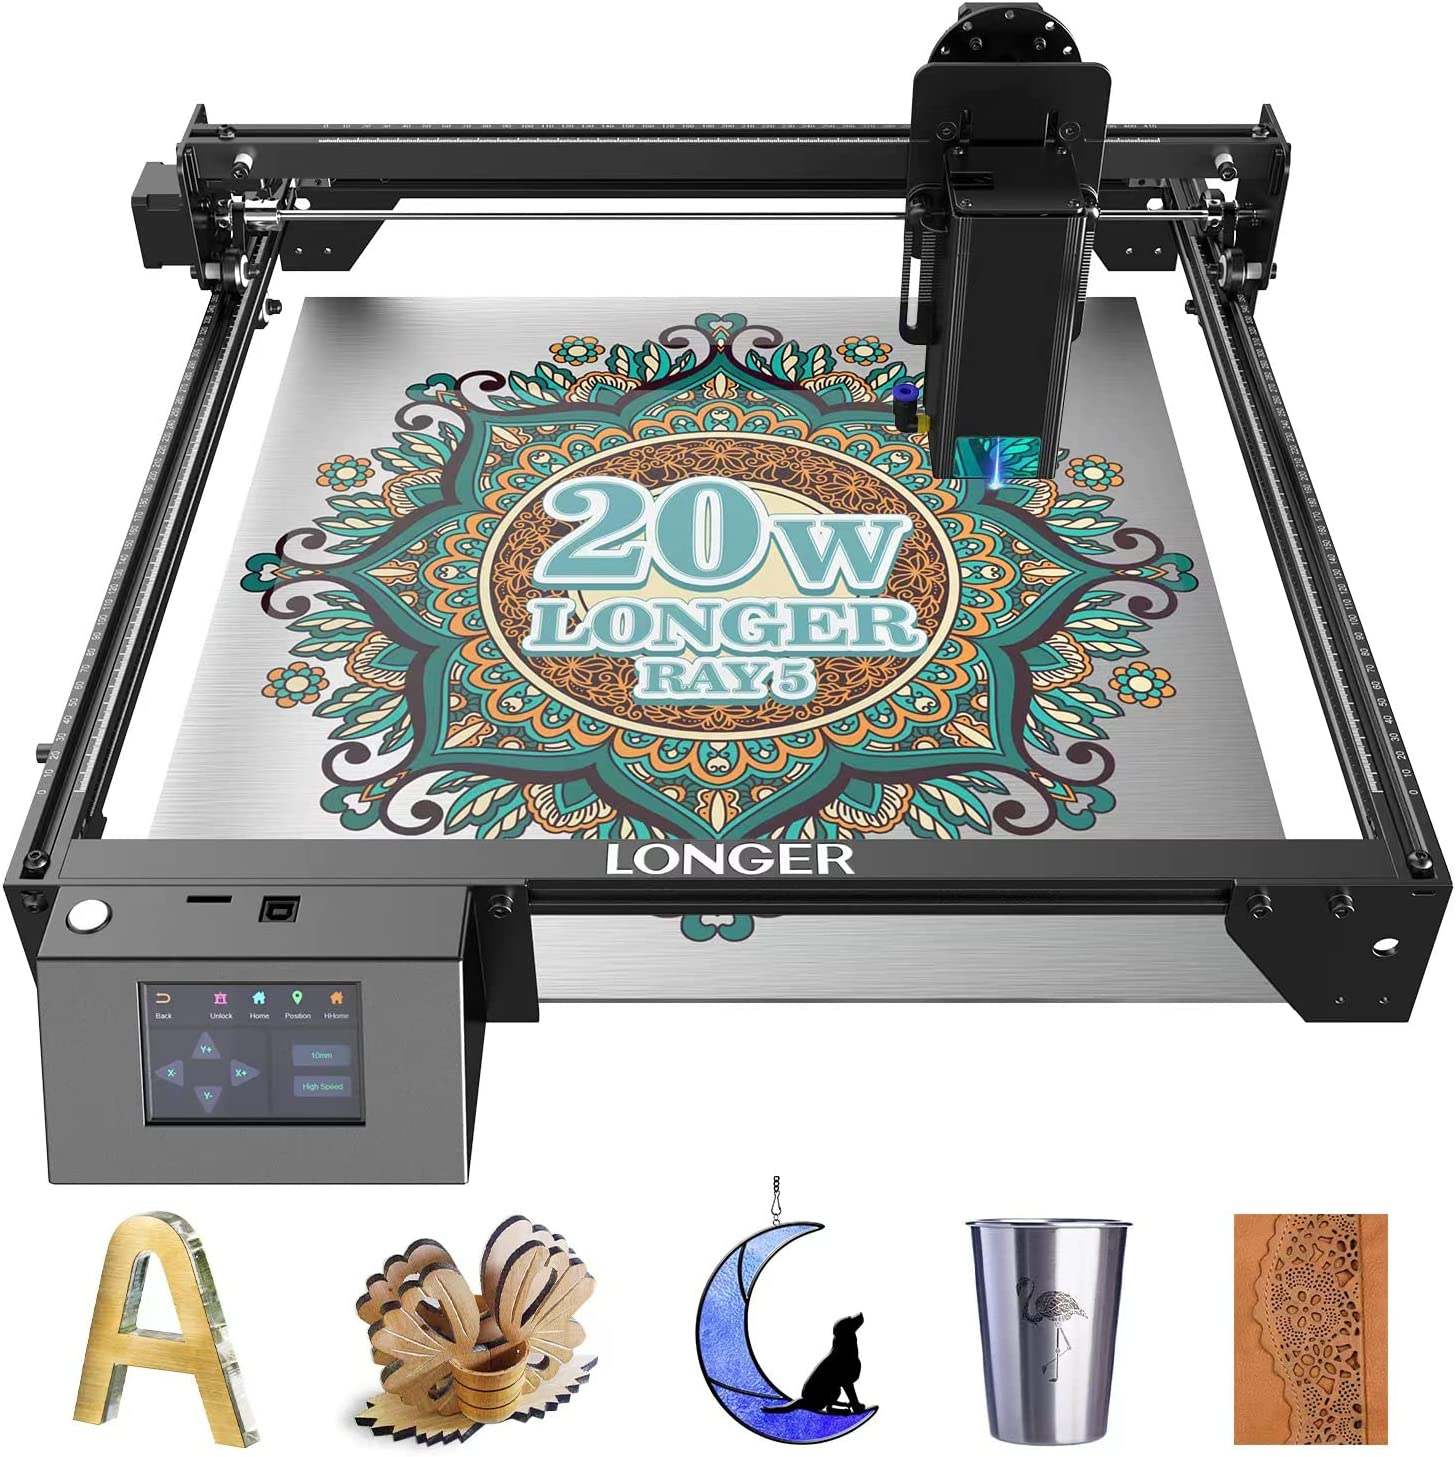 Creality Laser Engraver 22W Output, 120W High Power Laser Engraving Machine  CNC, DIY Laser Cutter and Engraver Machine for Metal and Wood, Paper